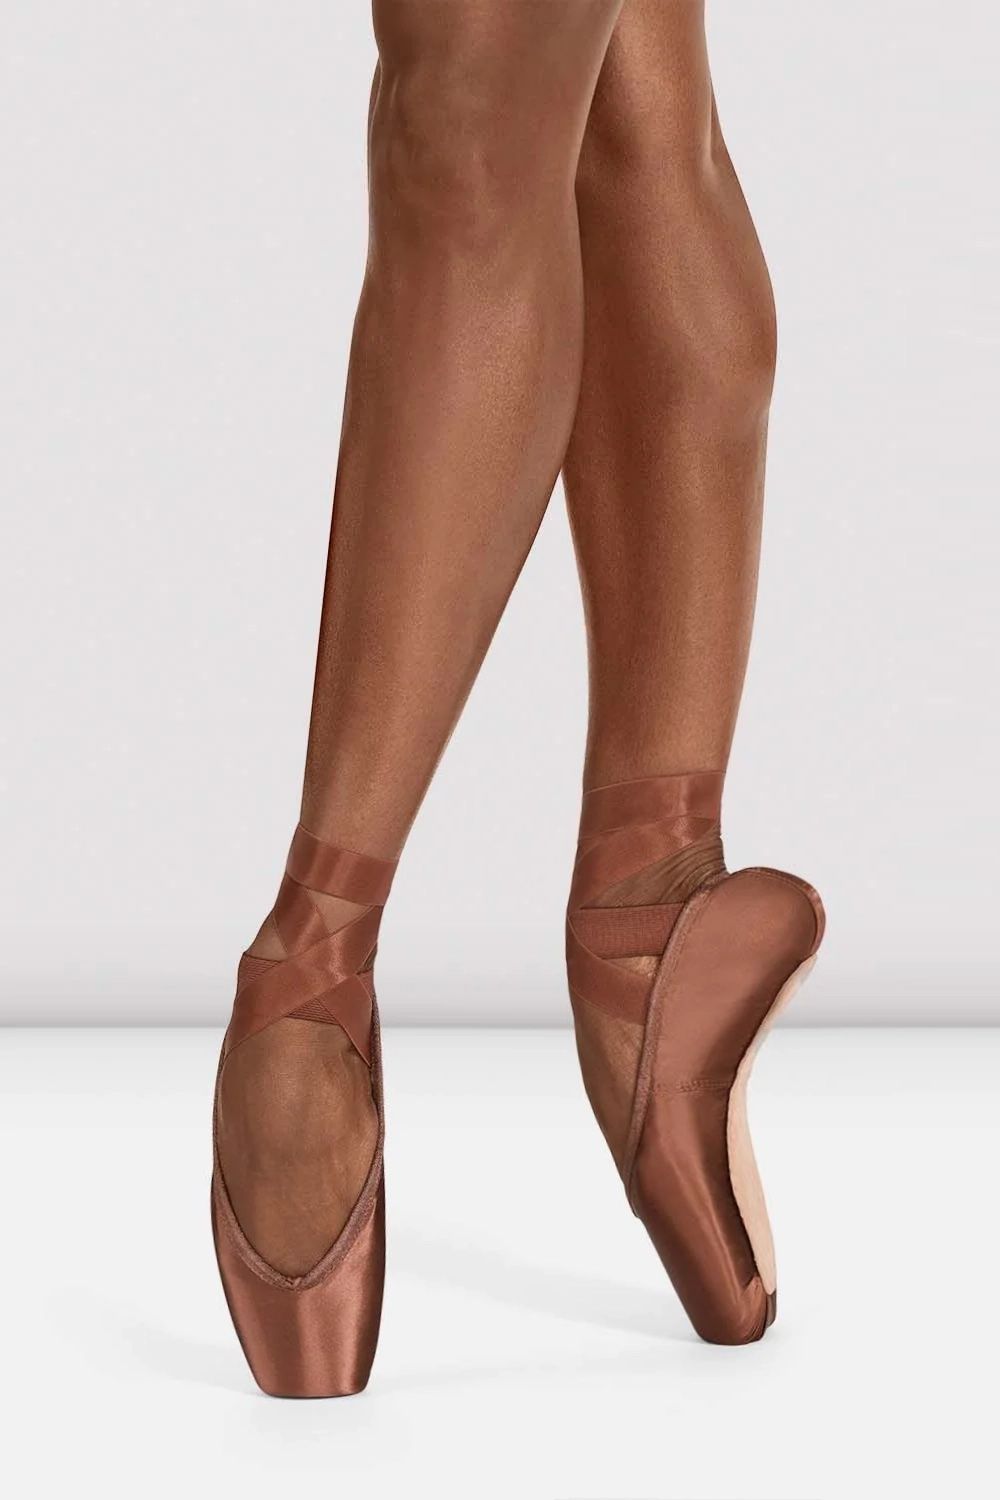 Bloch tonal pointe shoes in the bronze color B29.